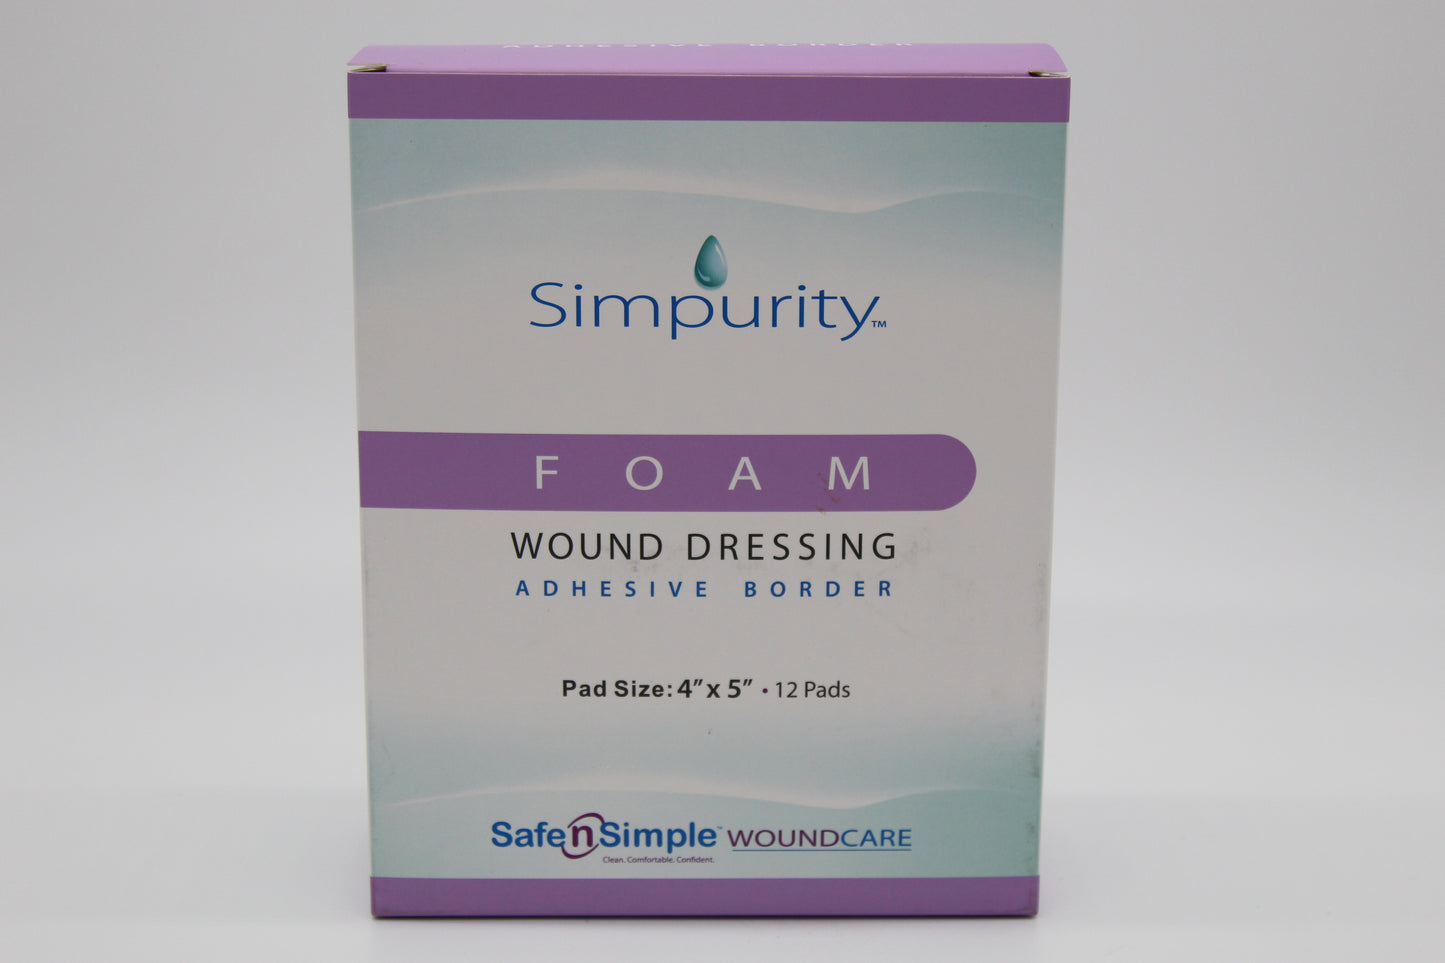 Foam - Adhesive Border Pads | Wound care dressing | Alginate dressings | Adhesive border pads | SNS Medical